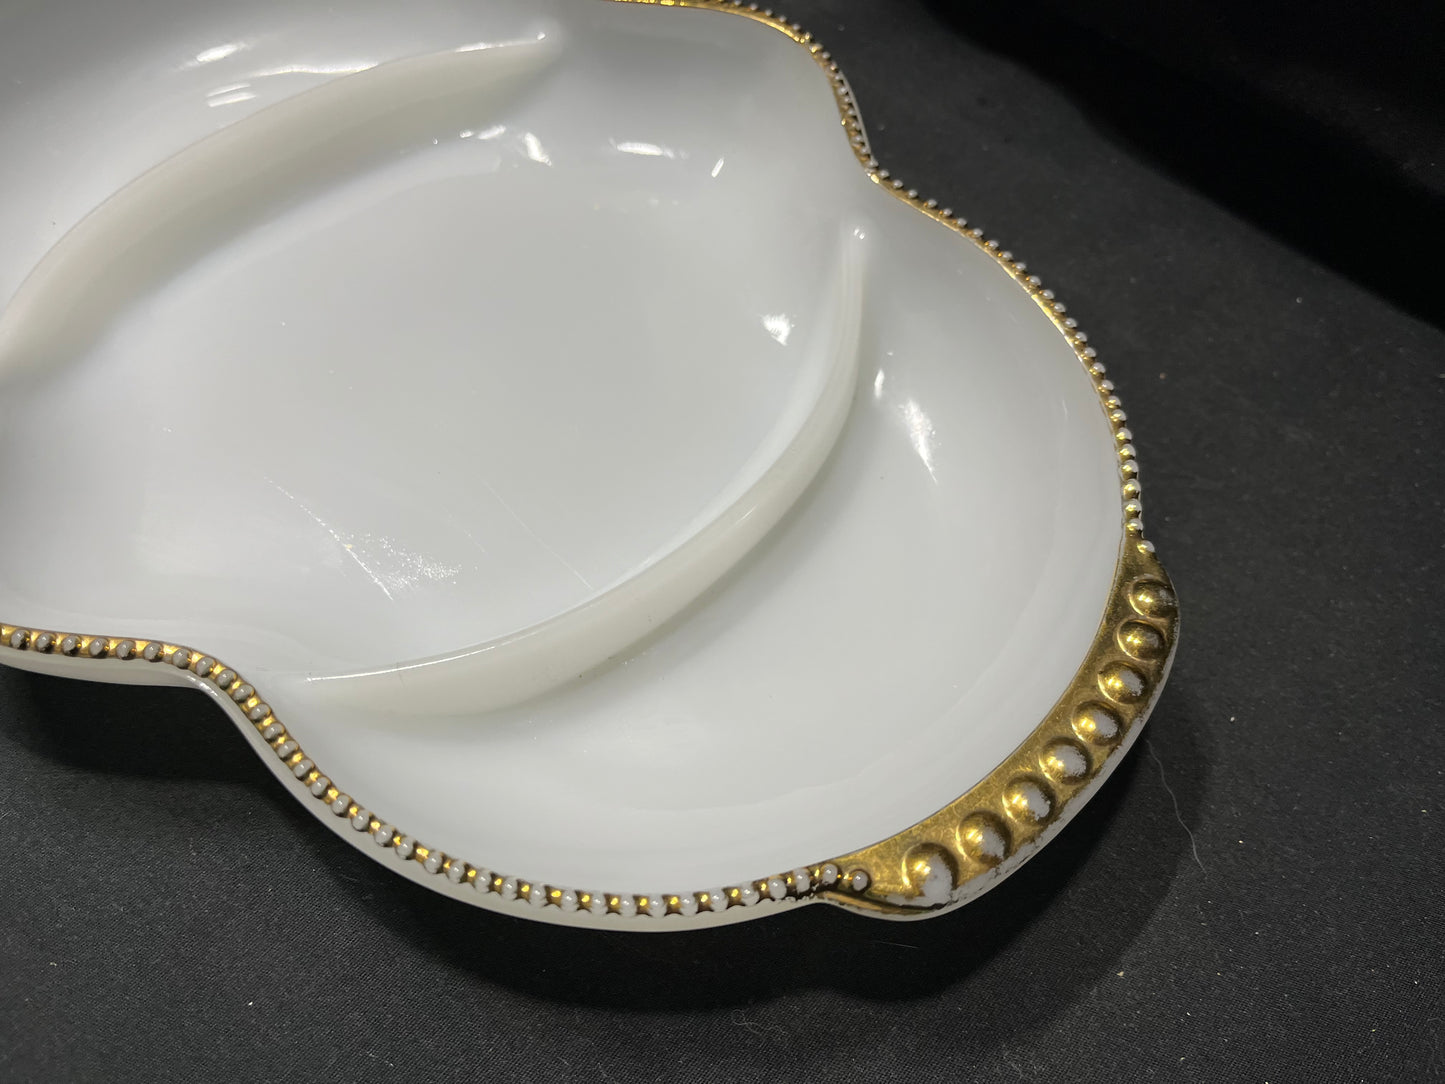 Fire King Milk Glass Divided Server with Gold Trim